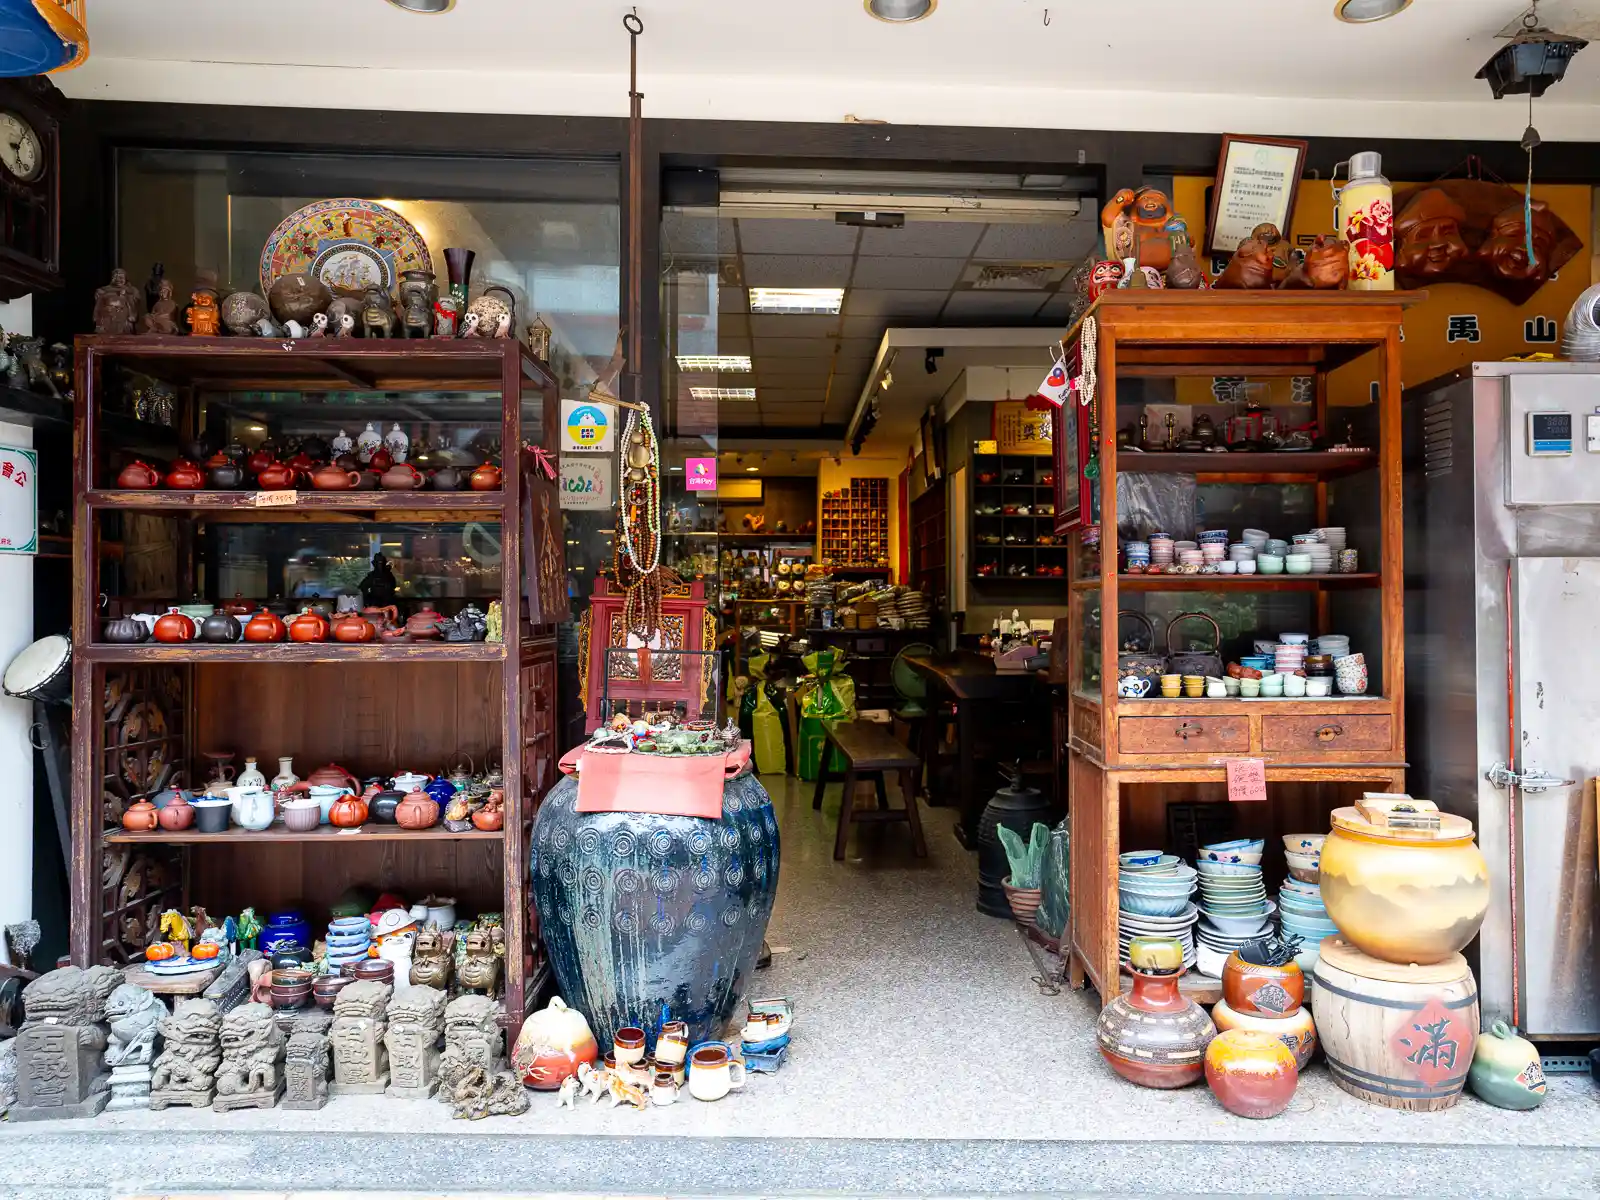 A more traditional ceramics shop is filled with pottery of all shapes and sizes; some teaware and stone carvings are also on display outside in front of the shop.